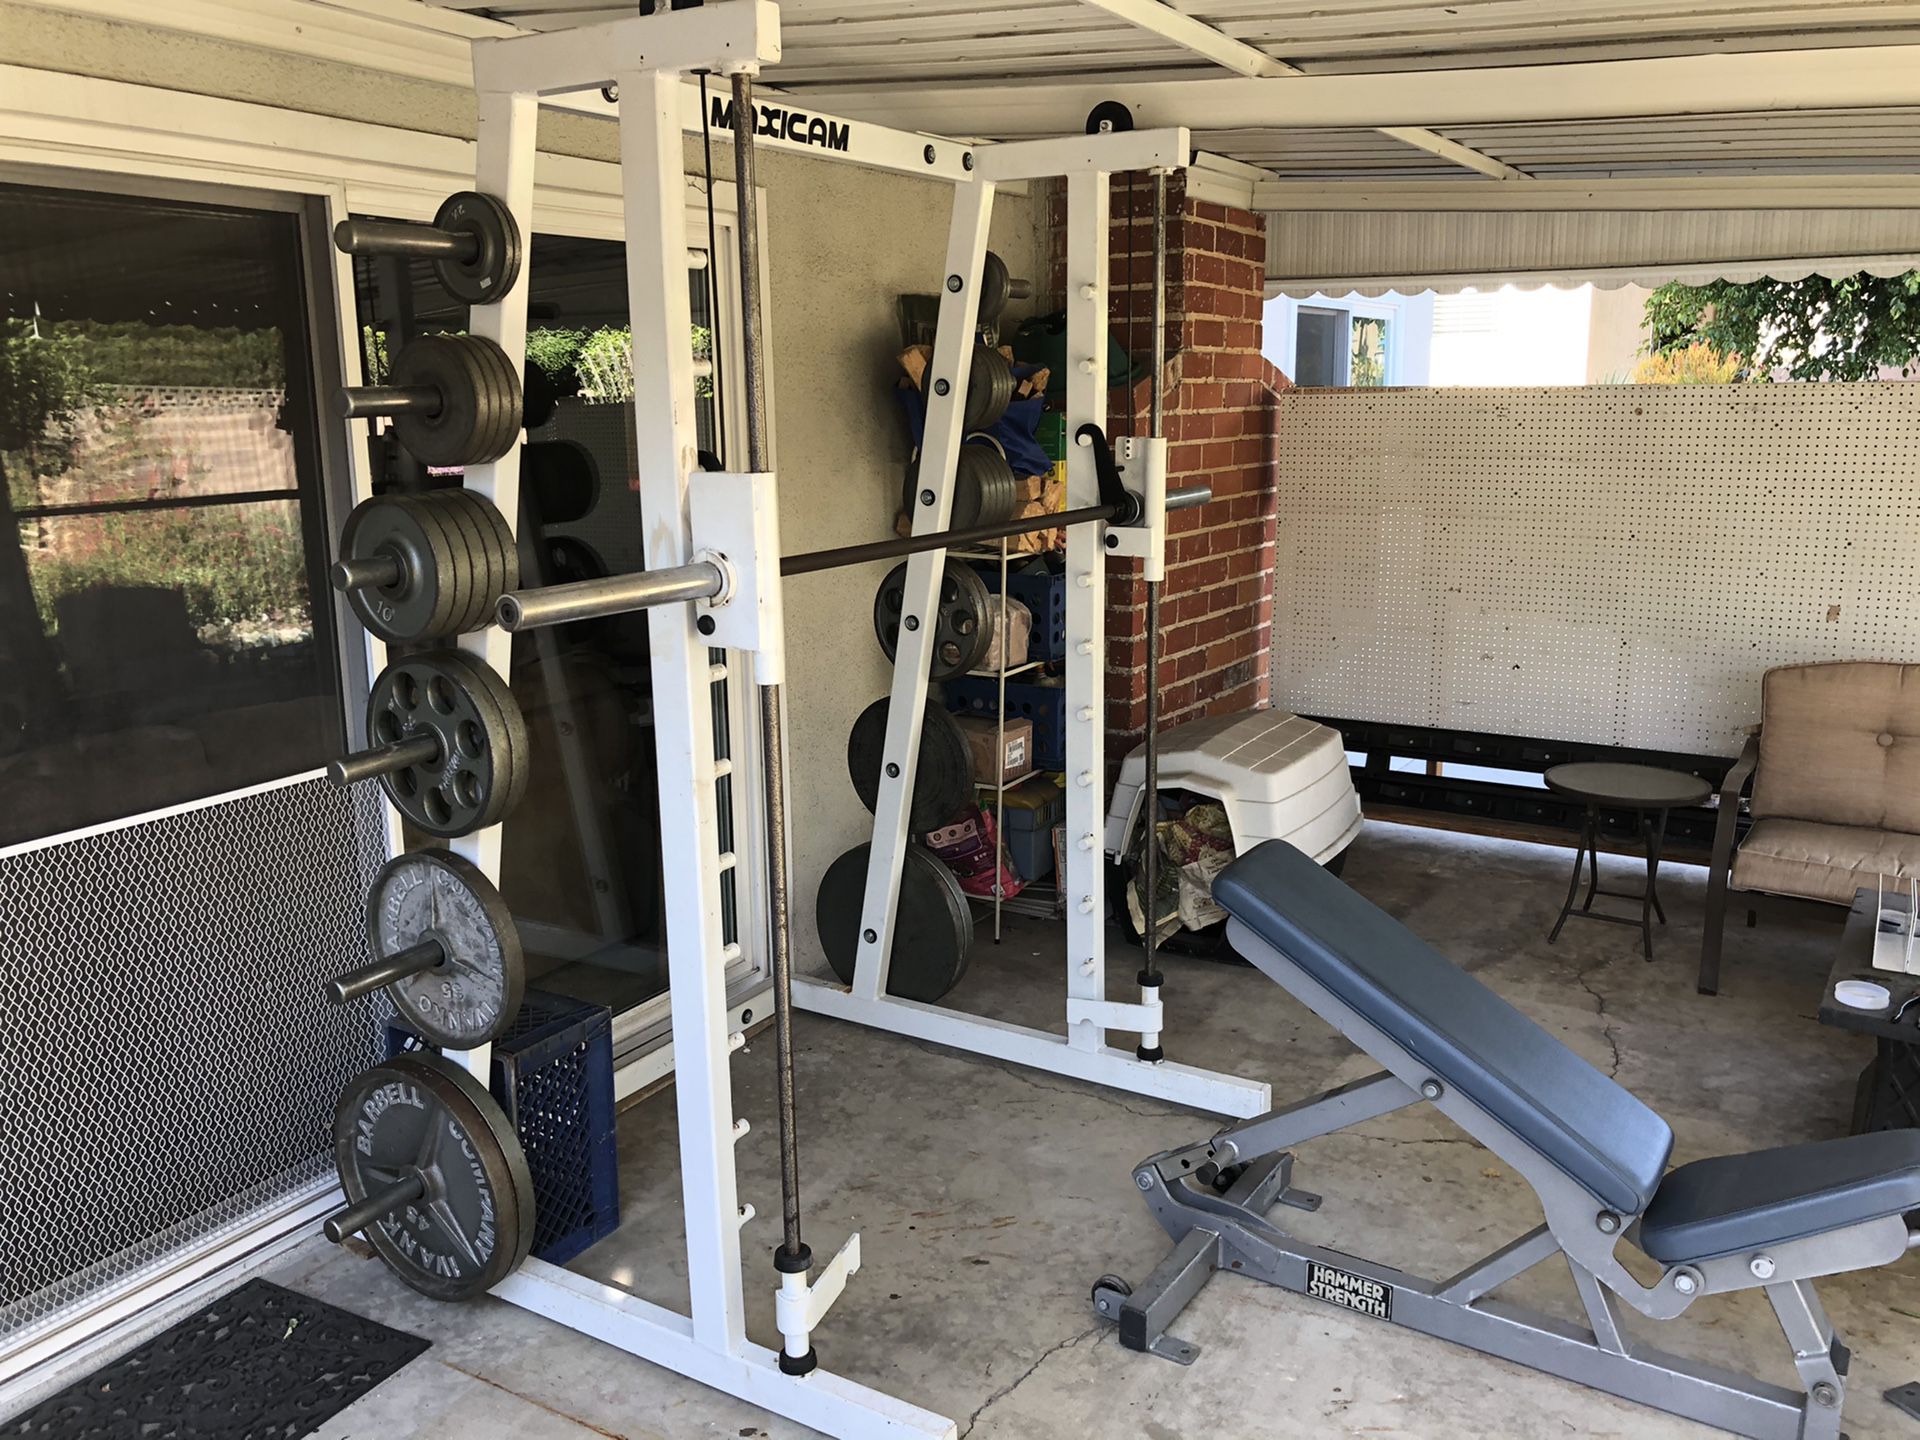 Maxicam smith machine squat rack press (hammer strength and Ivanko weights not included)